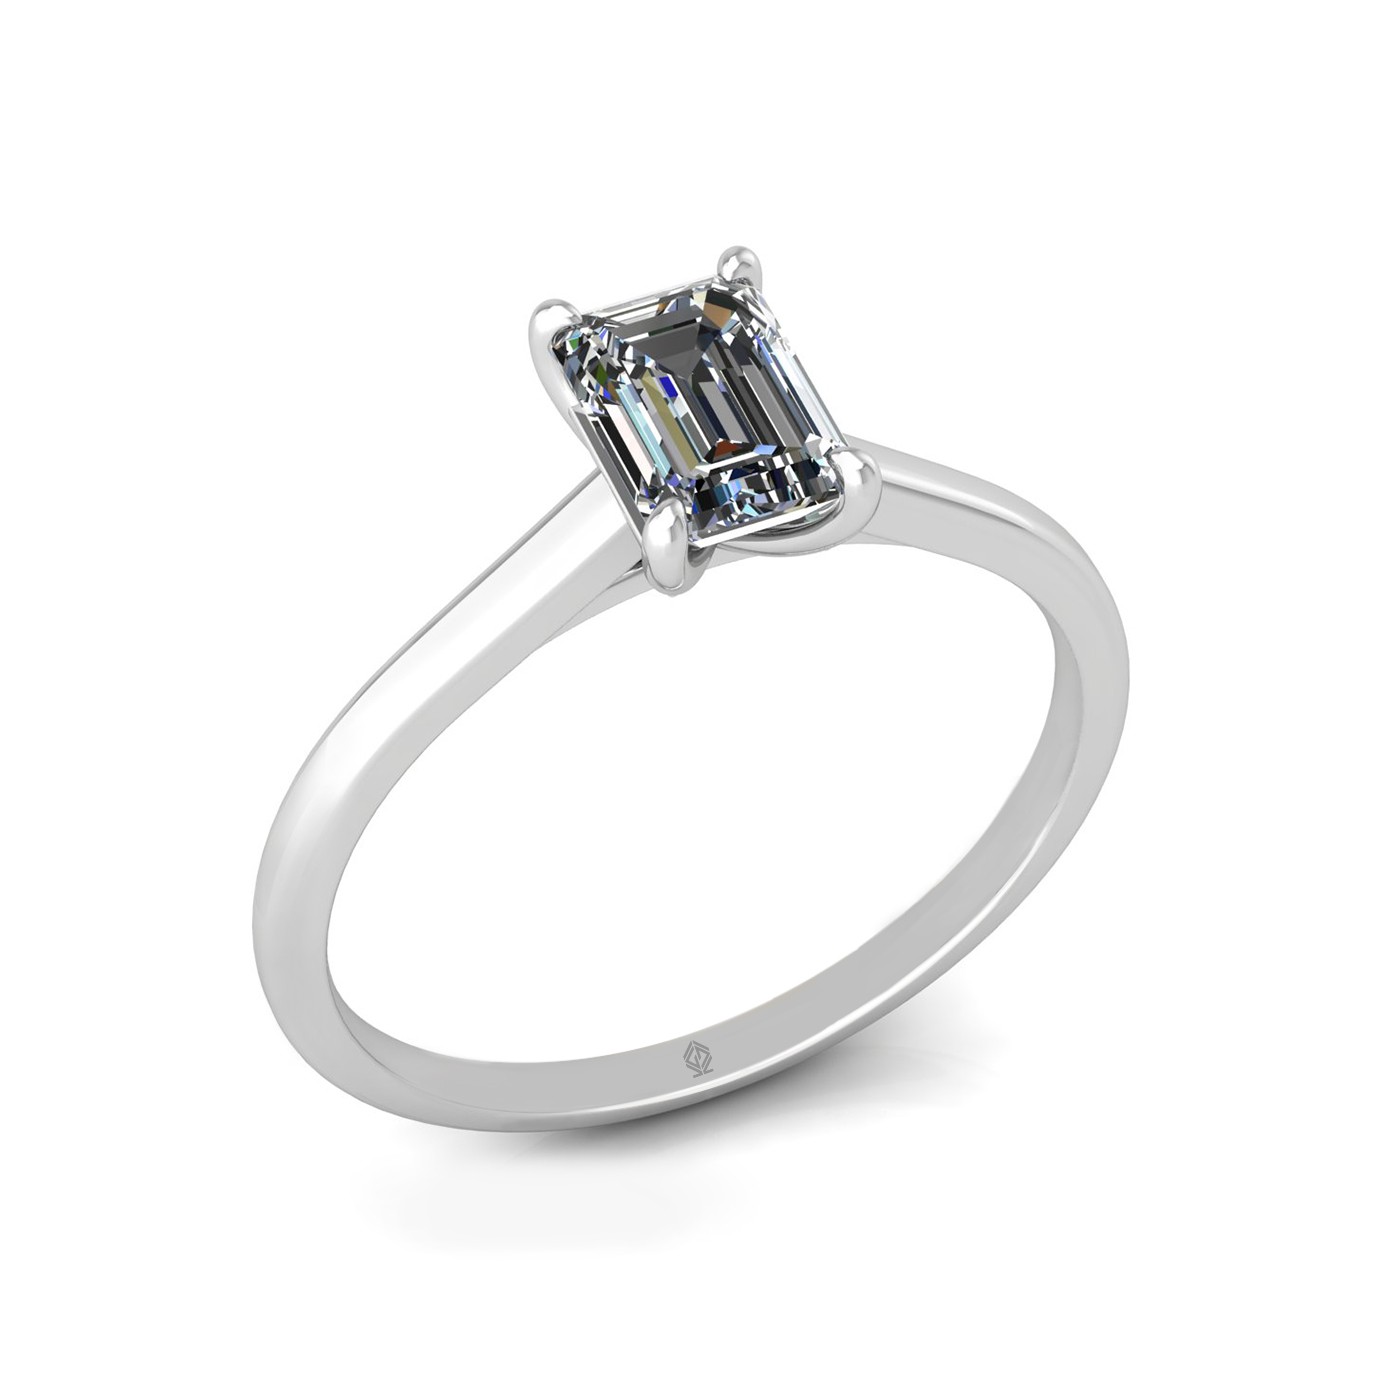 18k white gold  0,80 ct 4 prongs solitaire emerald cut diamond engagement ring with whisper thin band